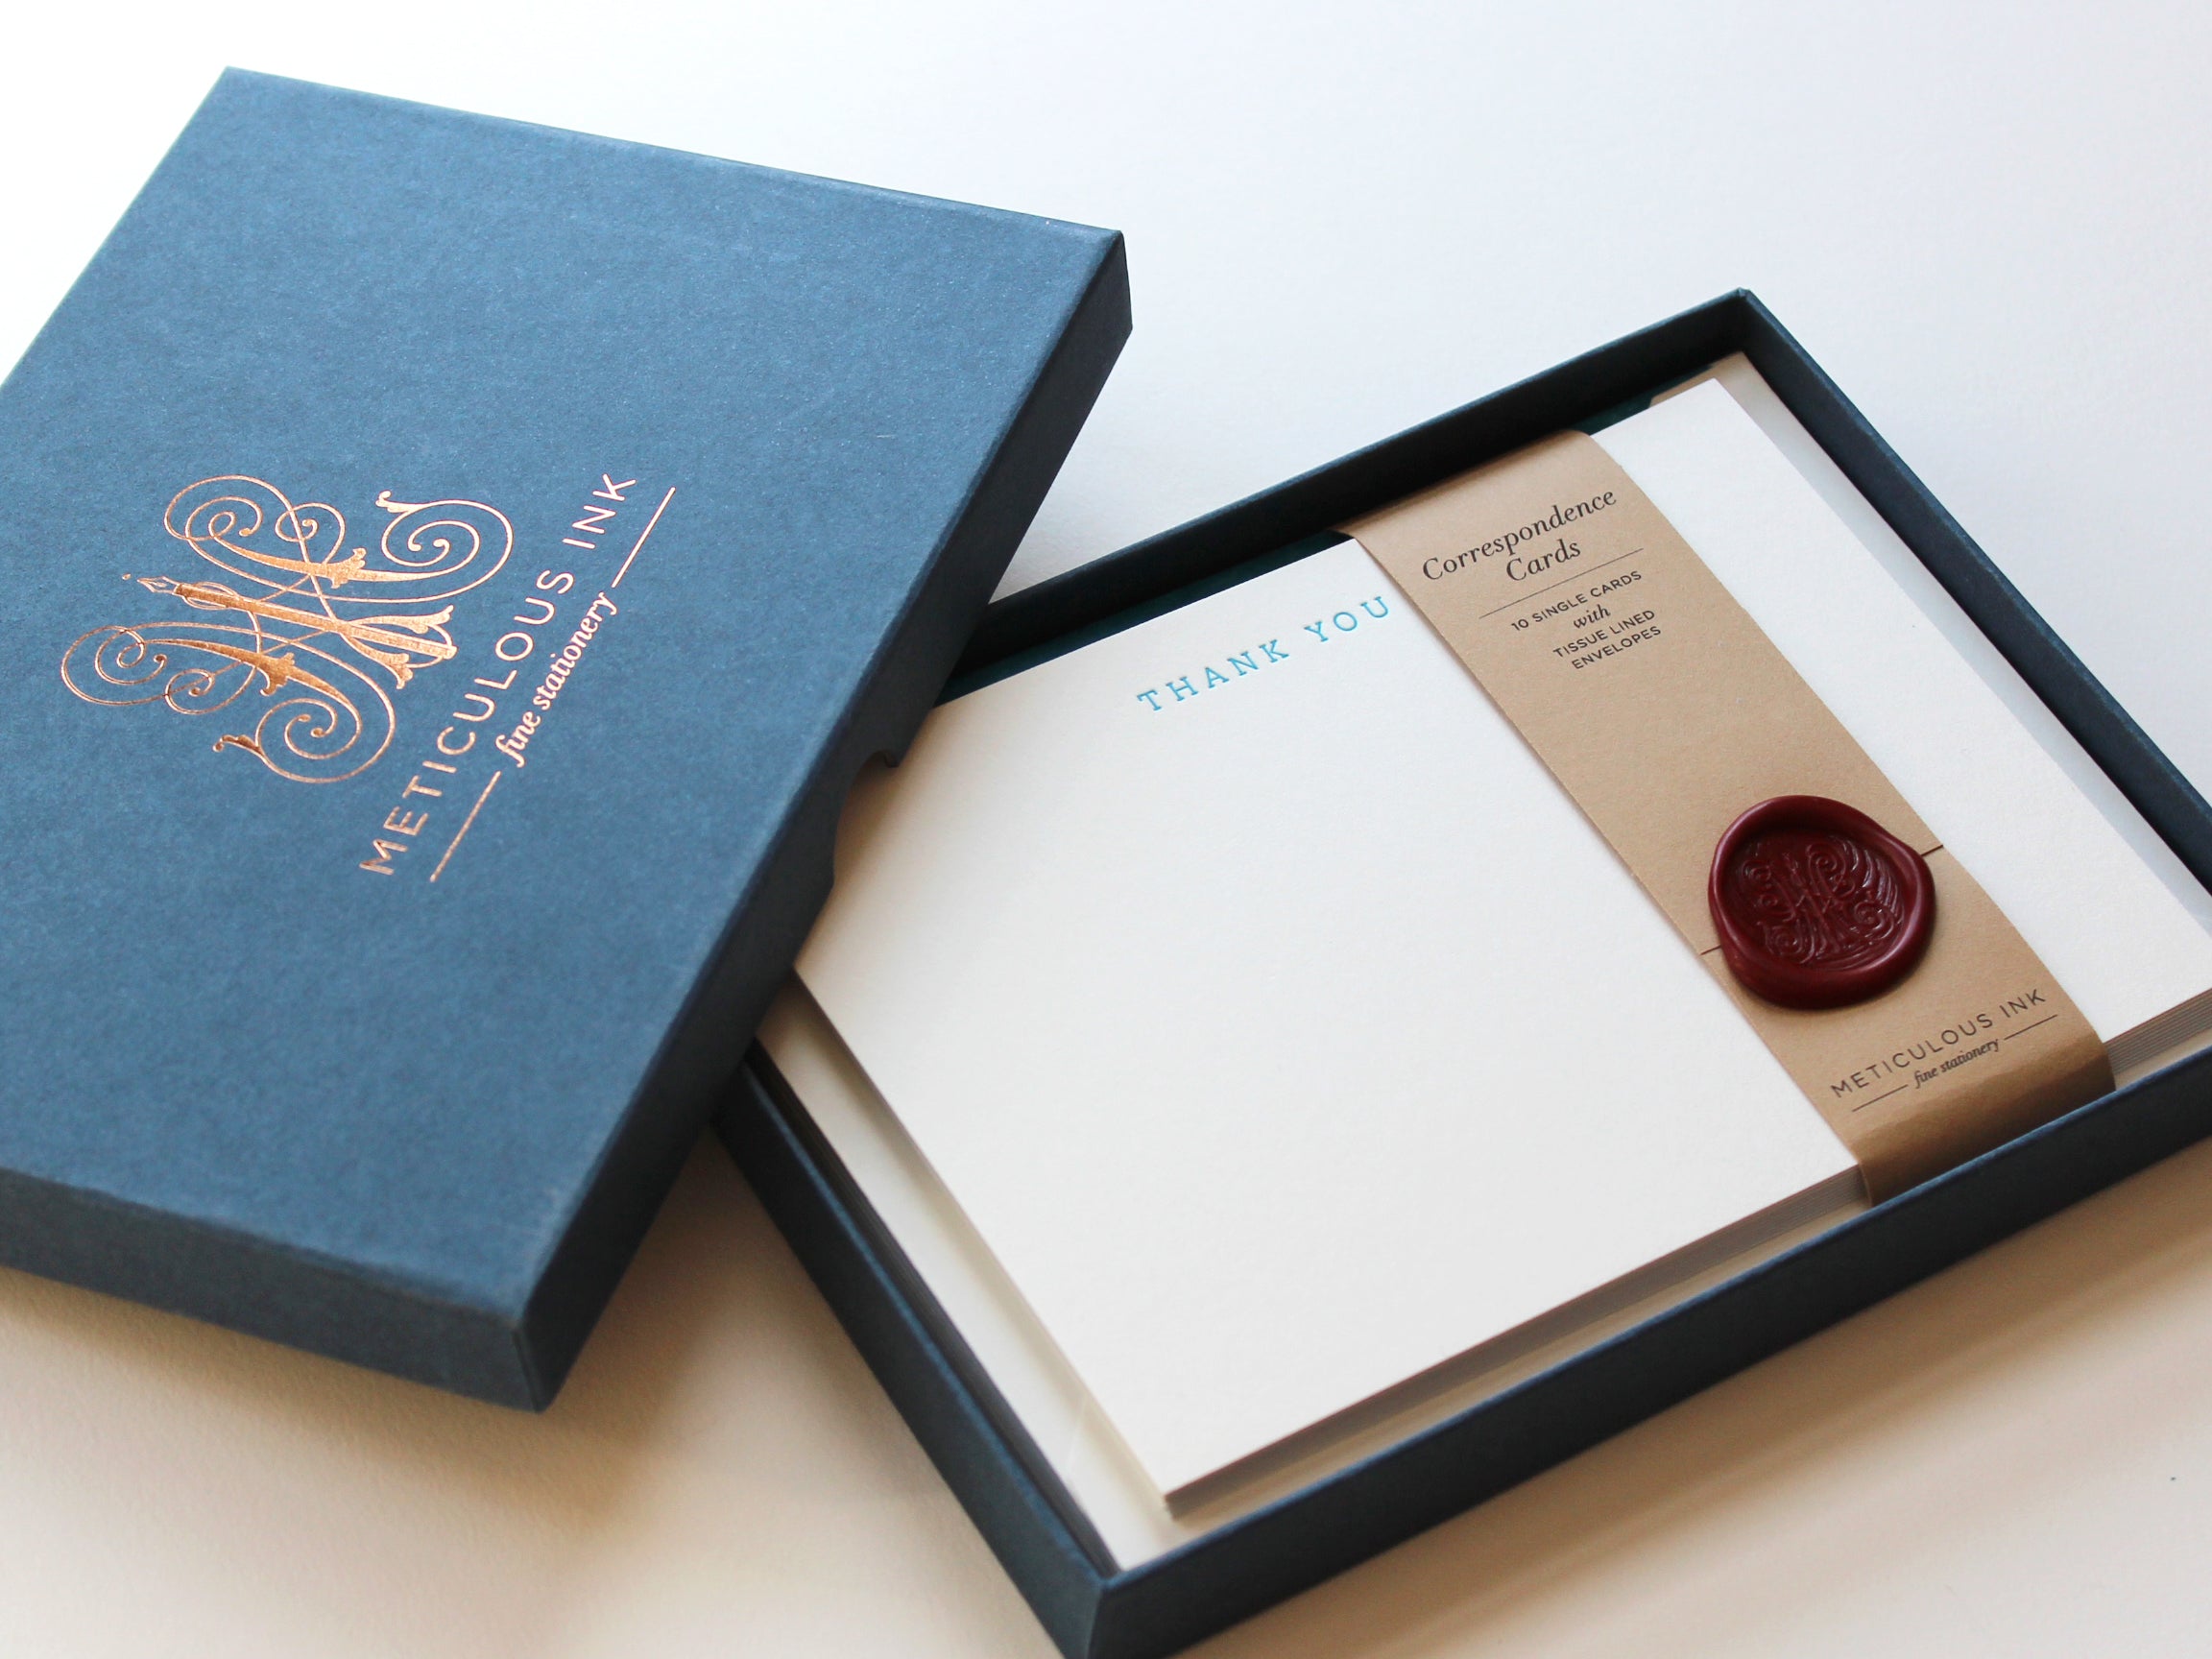 Teal Serif Thank You Letterpress Correspondence Cards in display box with wax seal and Meticulous Ink logo on box